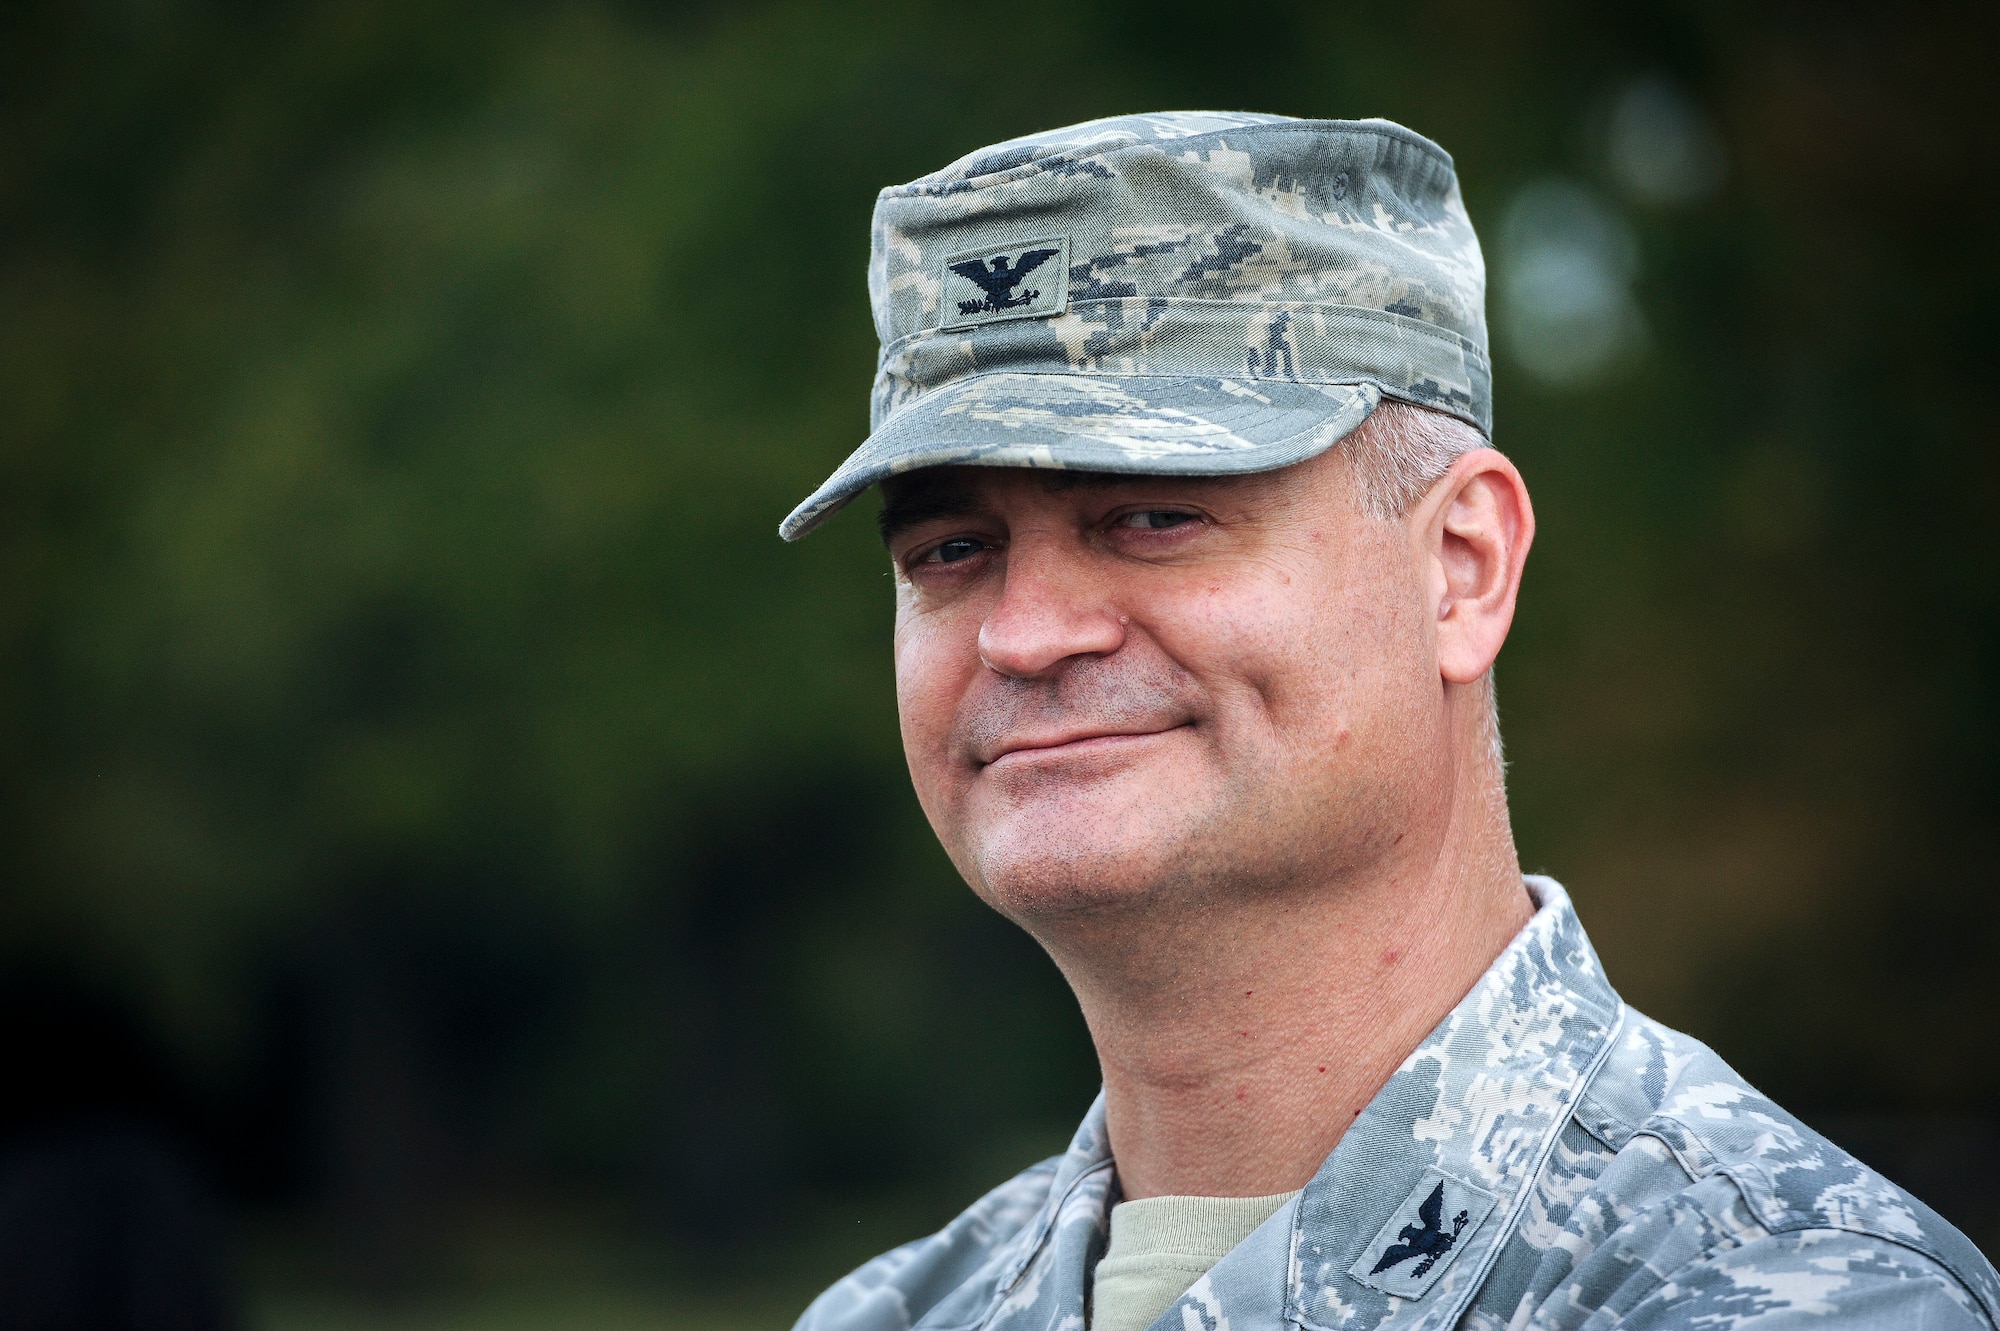 Col. Steven Cabosky, Air Combat Command weather requirements division chief, smiles after a resiliency walk on Joint Base Langley-Eustis, Virginia, Oct. 25, 2019. As part of an effort to boost morale, the resiliency walk also gave senior leaders an opportunity to build camaraderie with their Airmen. (U.S. Air Force photo by Tech. Sgt. Nick Wilson)